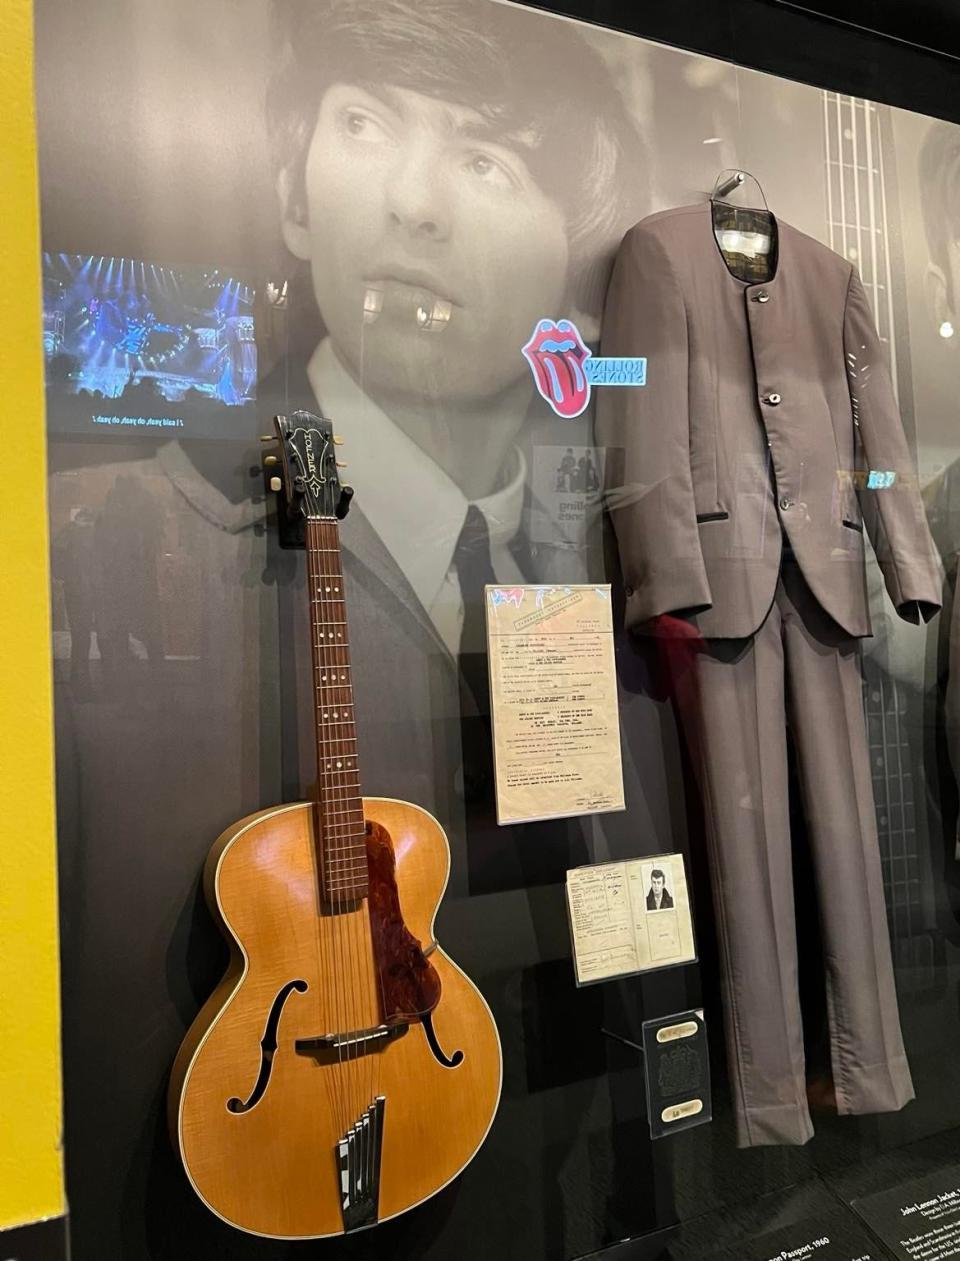 A special Beatles exhibit is among the many attractions at the Rock & Roll Hall of Fame in downtown Cleveland.